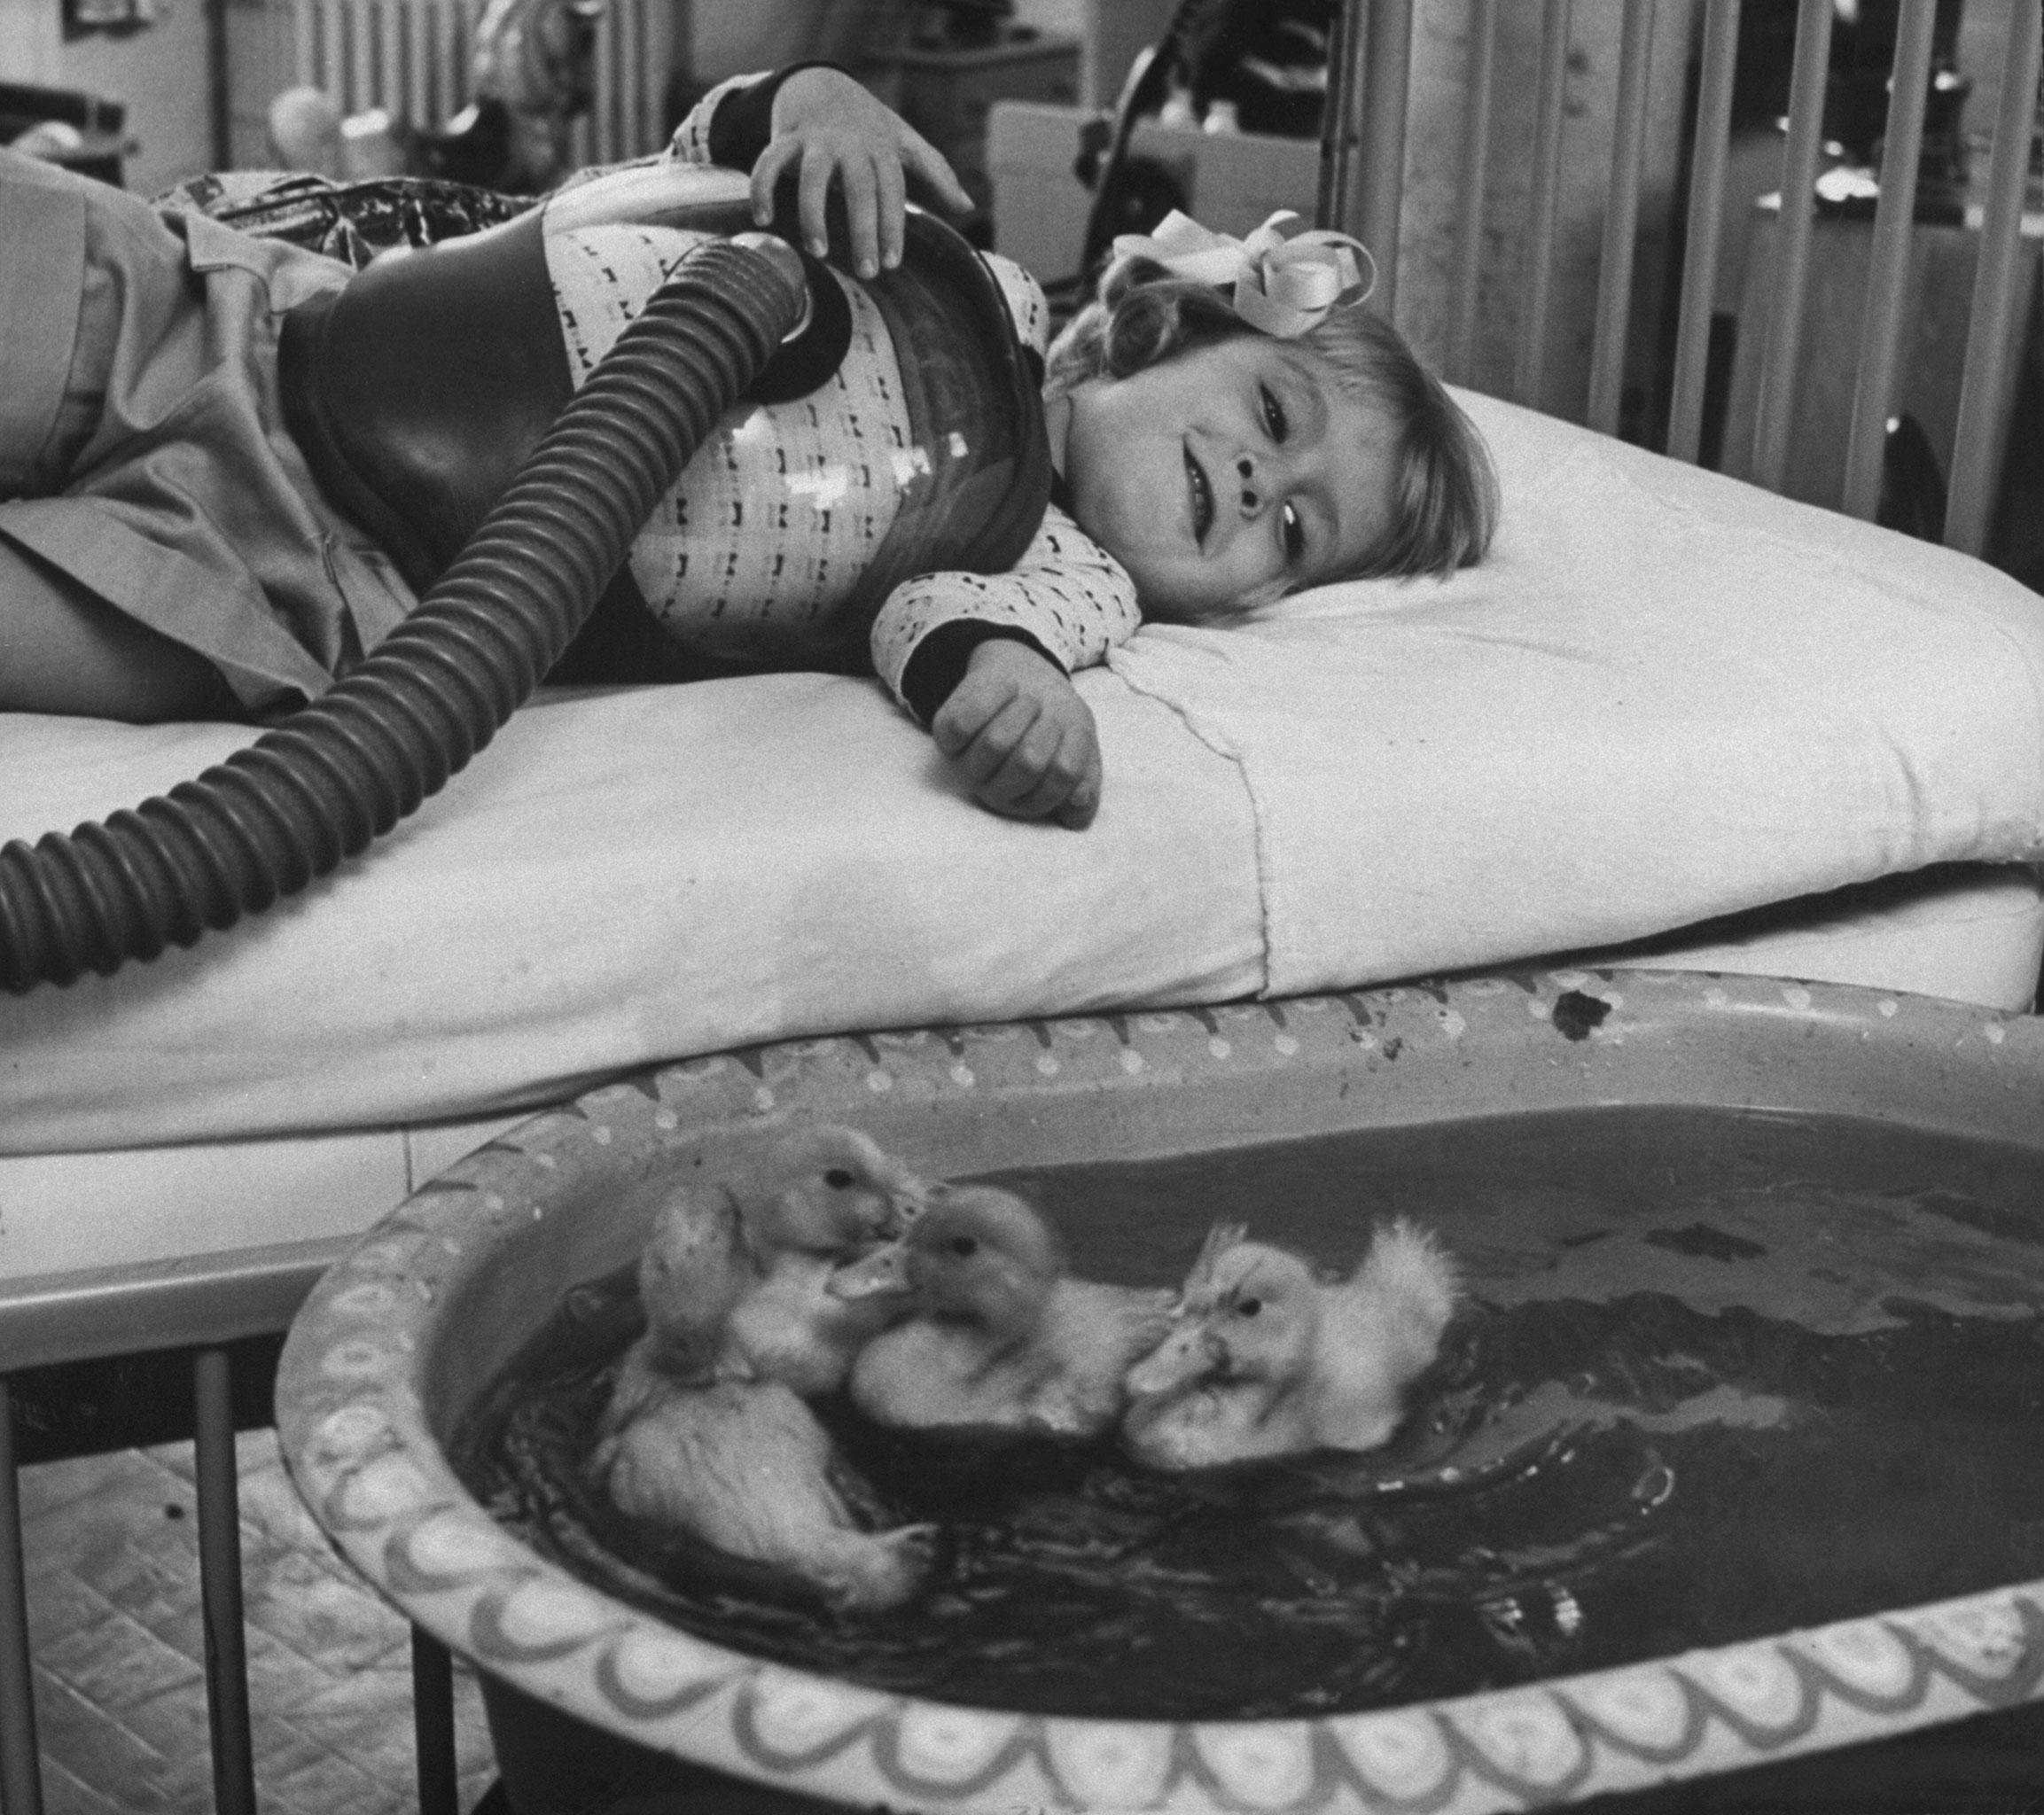 A little girl receiving tests gazes into pool containing baby ducks — an early use of animals as part of medical therapy, 1956.